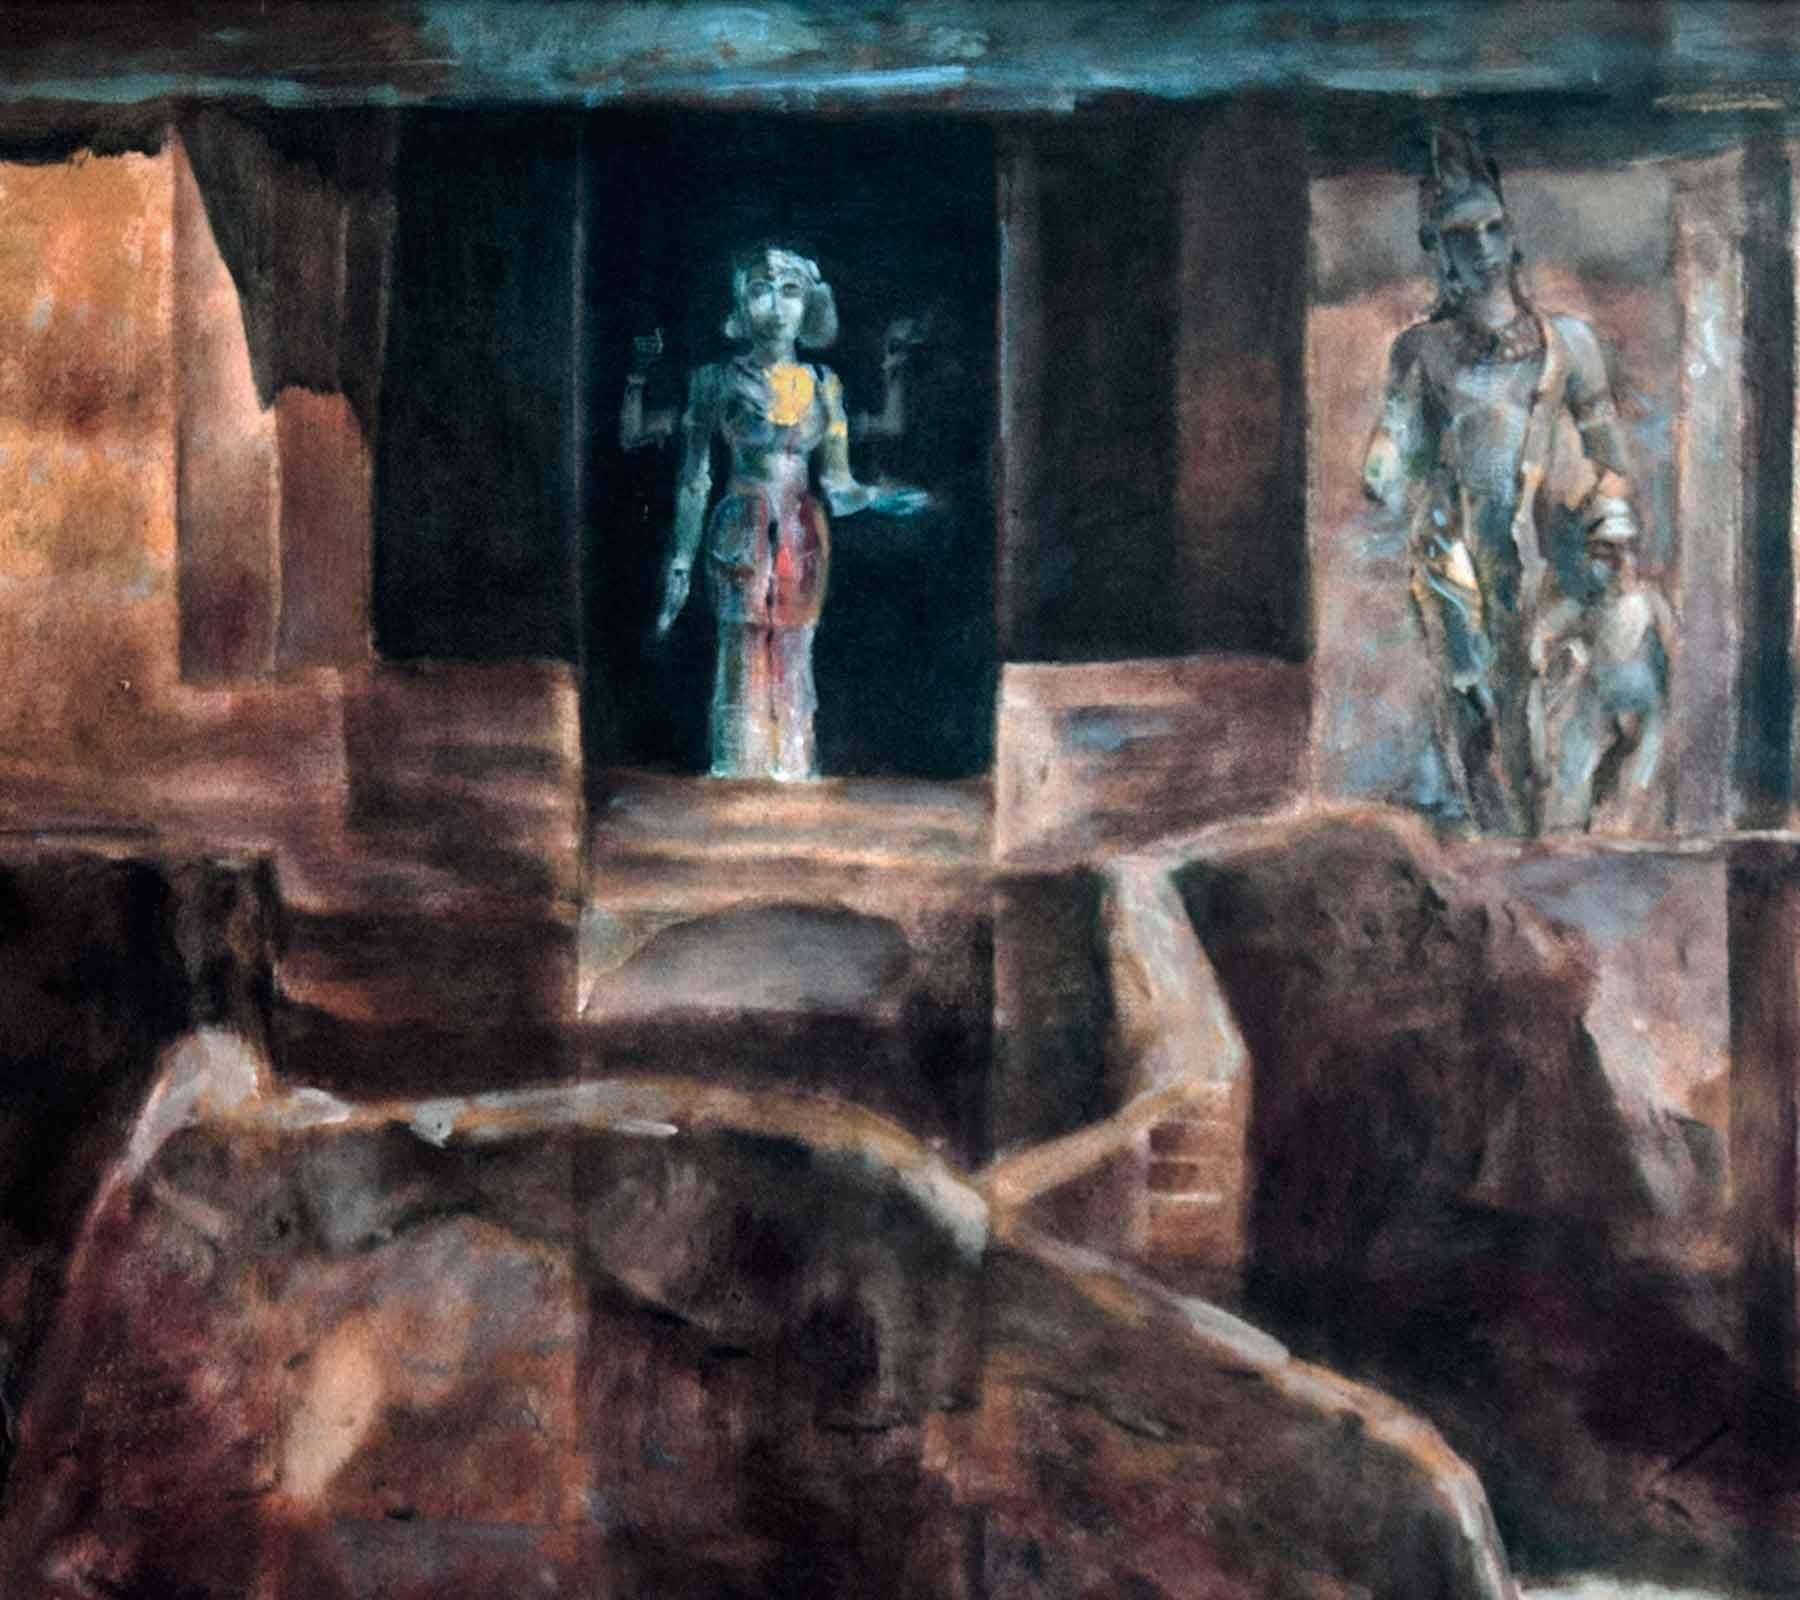 Deity, Mythscape Series, Structures, Indian Art, Oil on canvas, Brown 